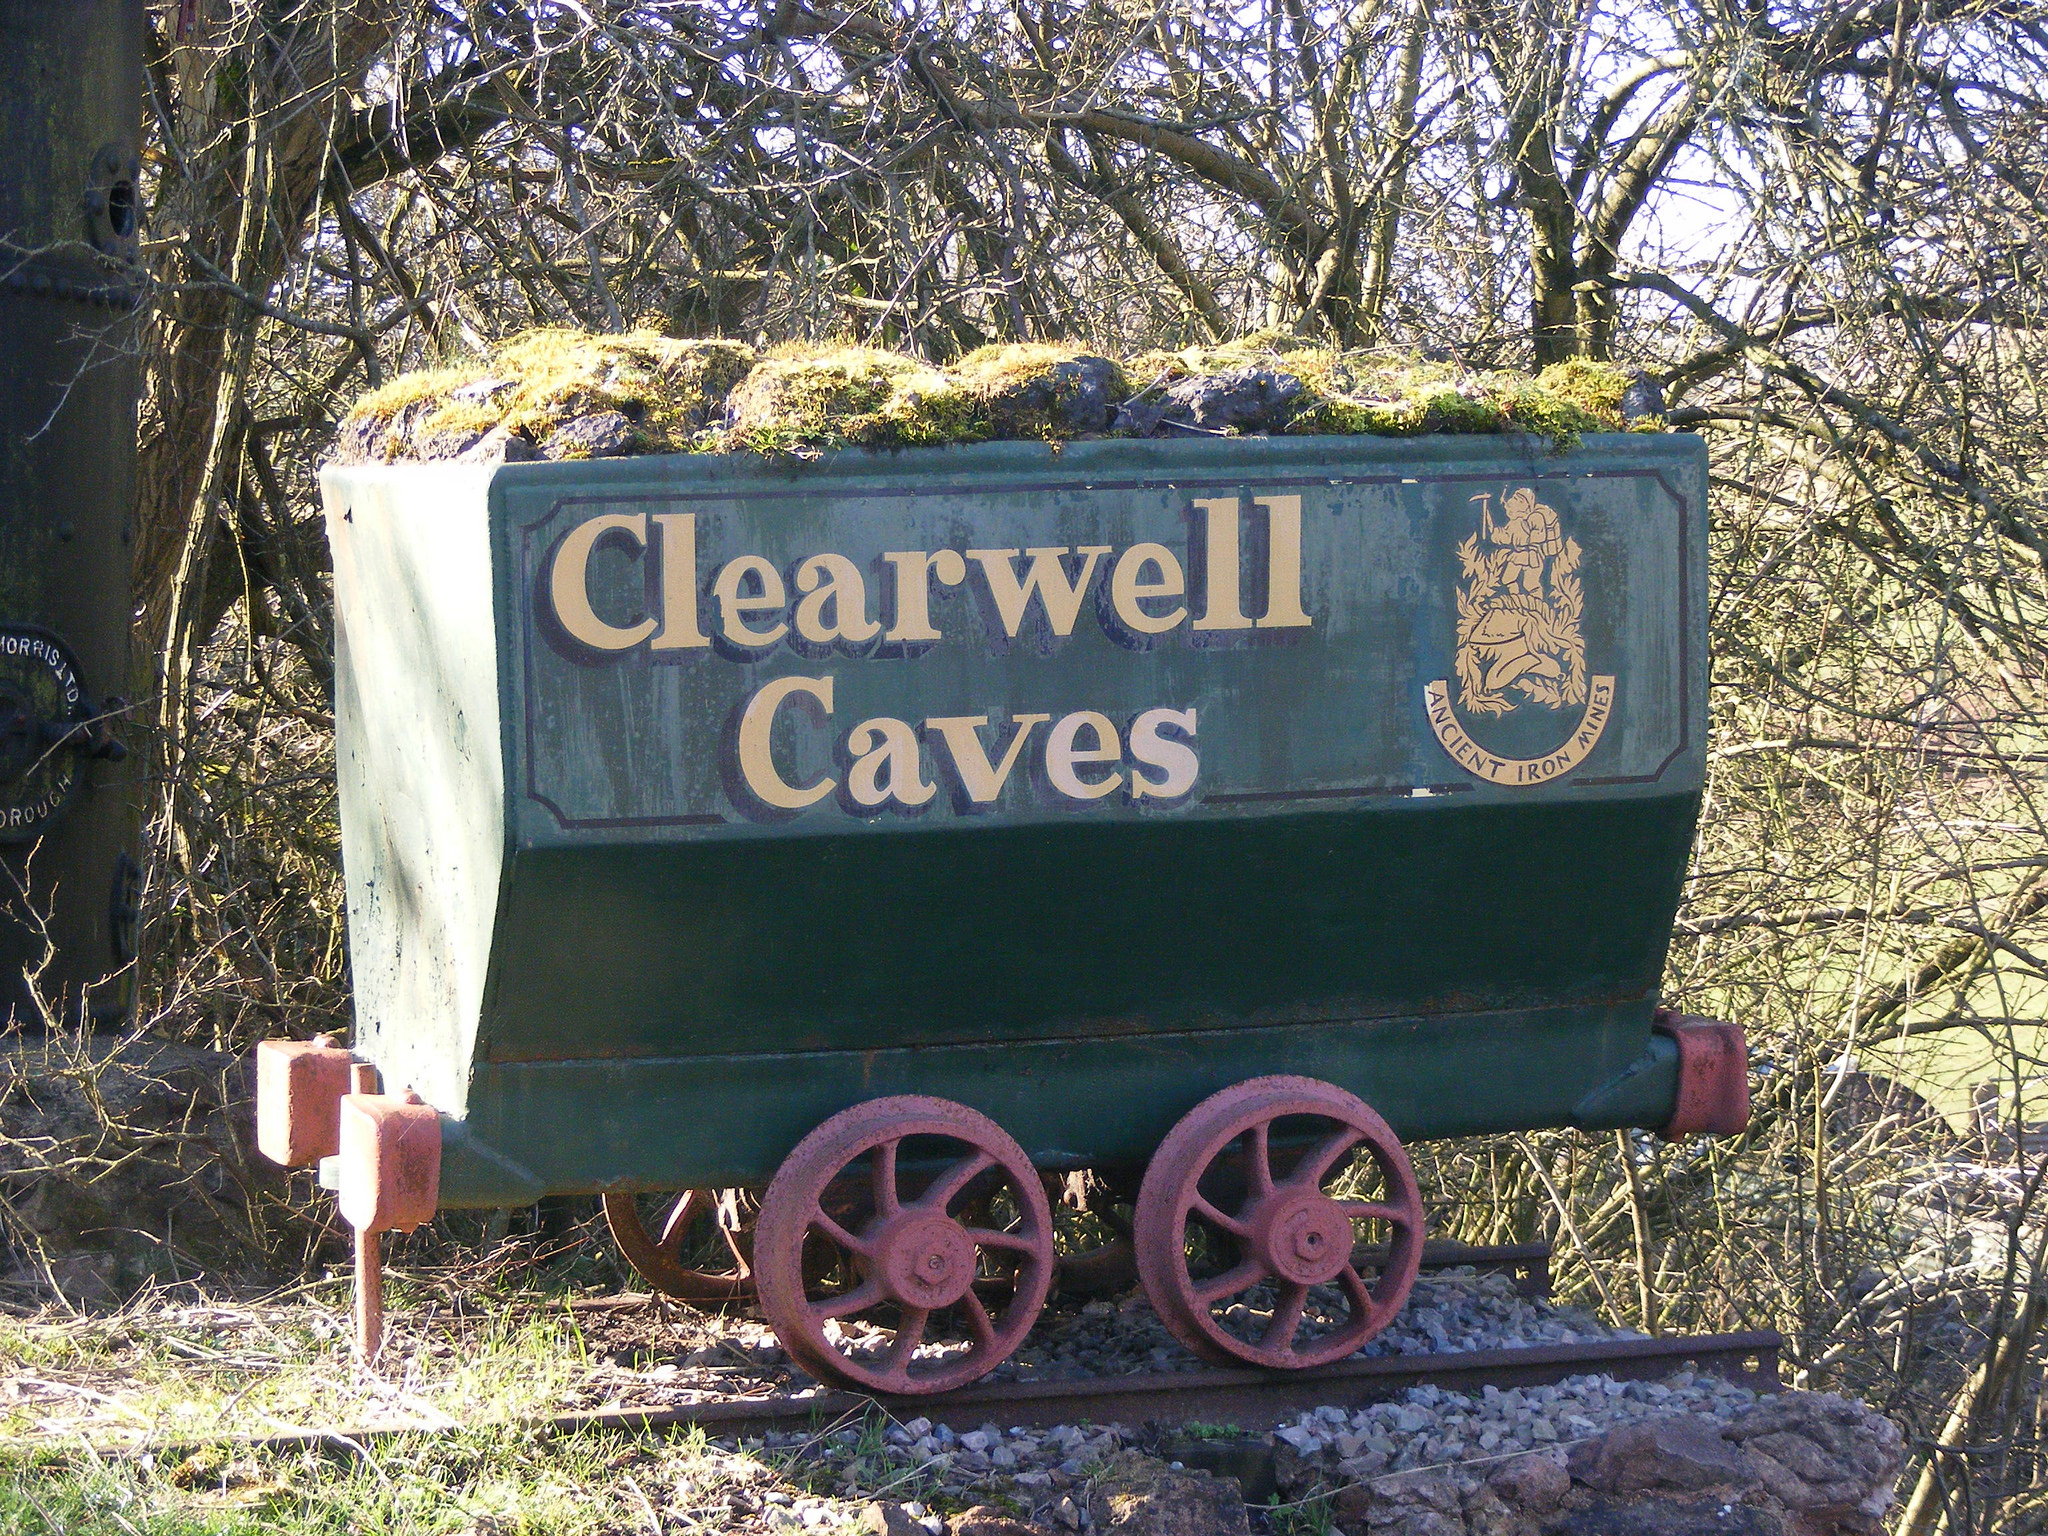 Mineral wagon on display at Clearwell Caves